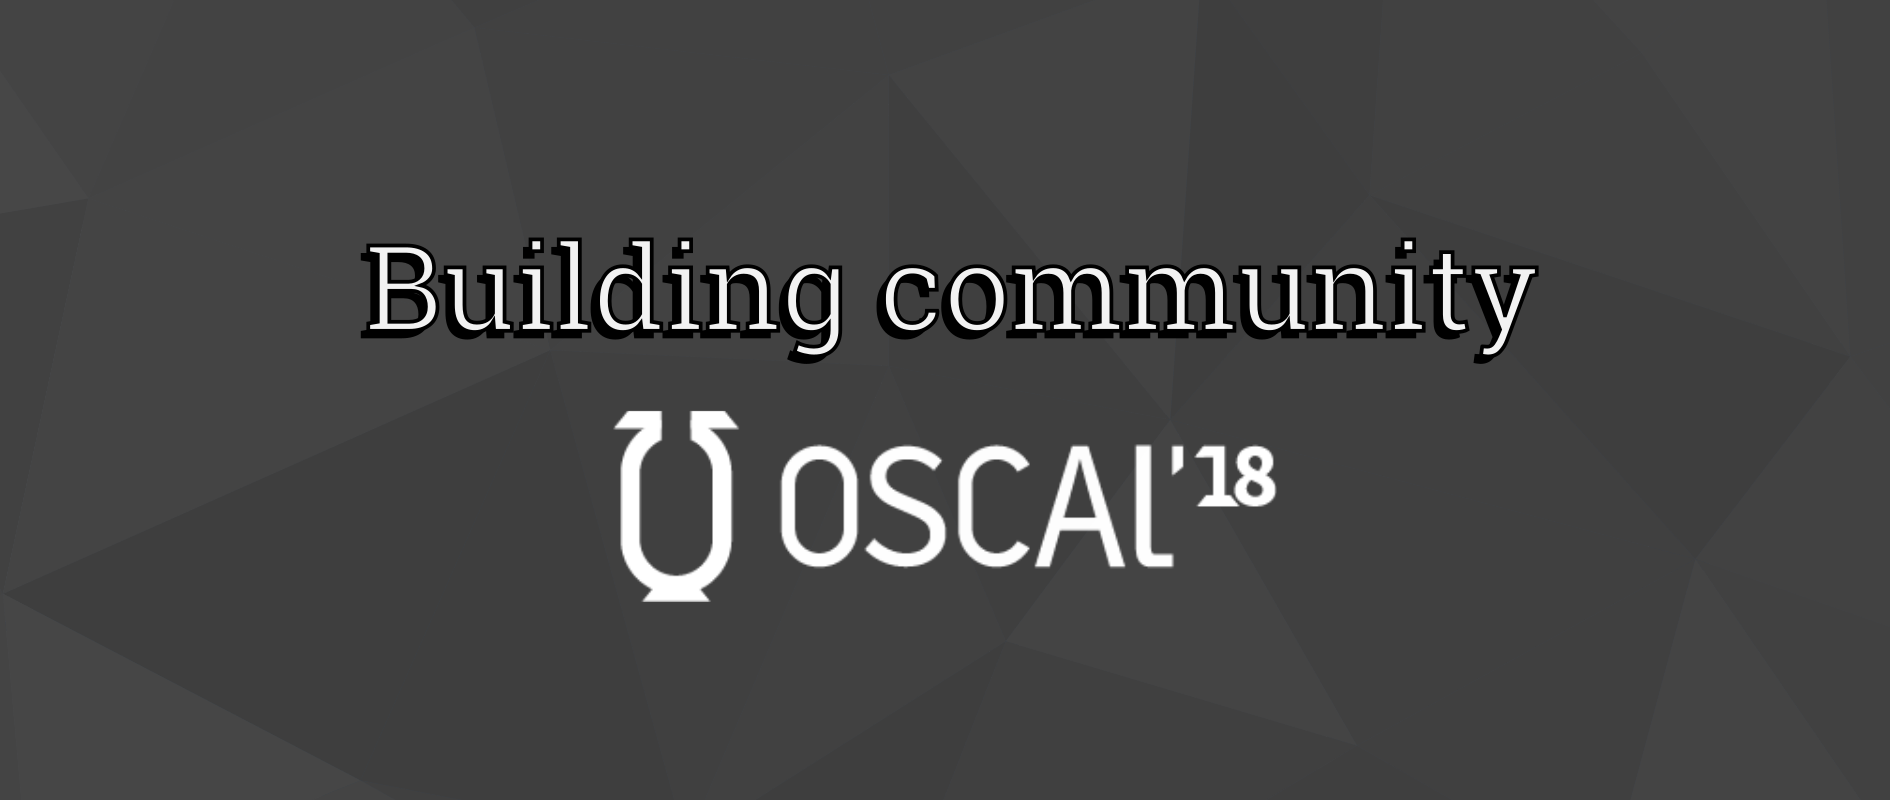 Building community at Open Source Conference Albania (OSCAL) 2018